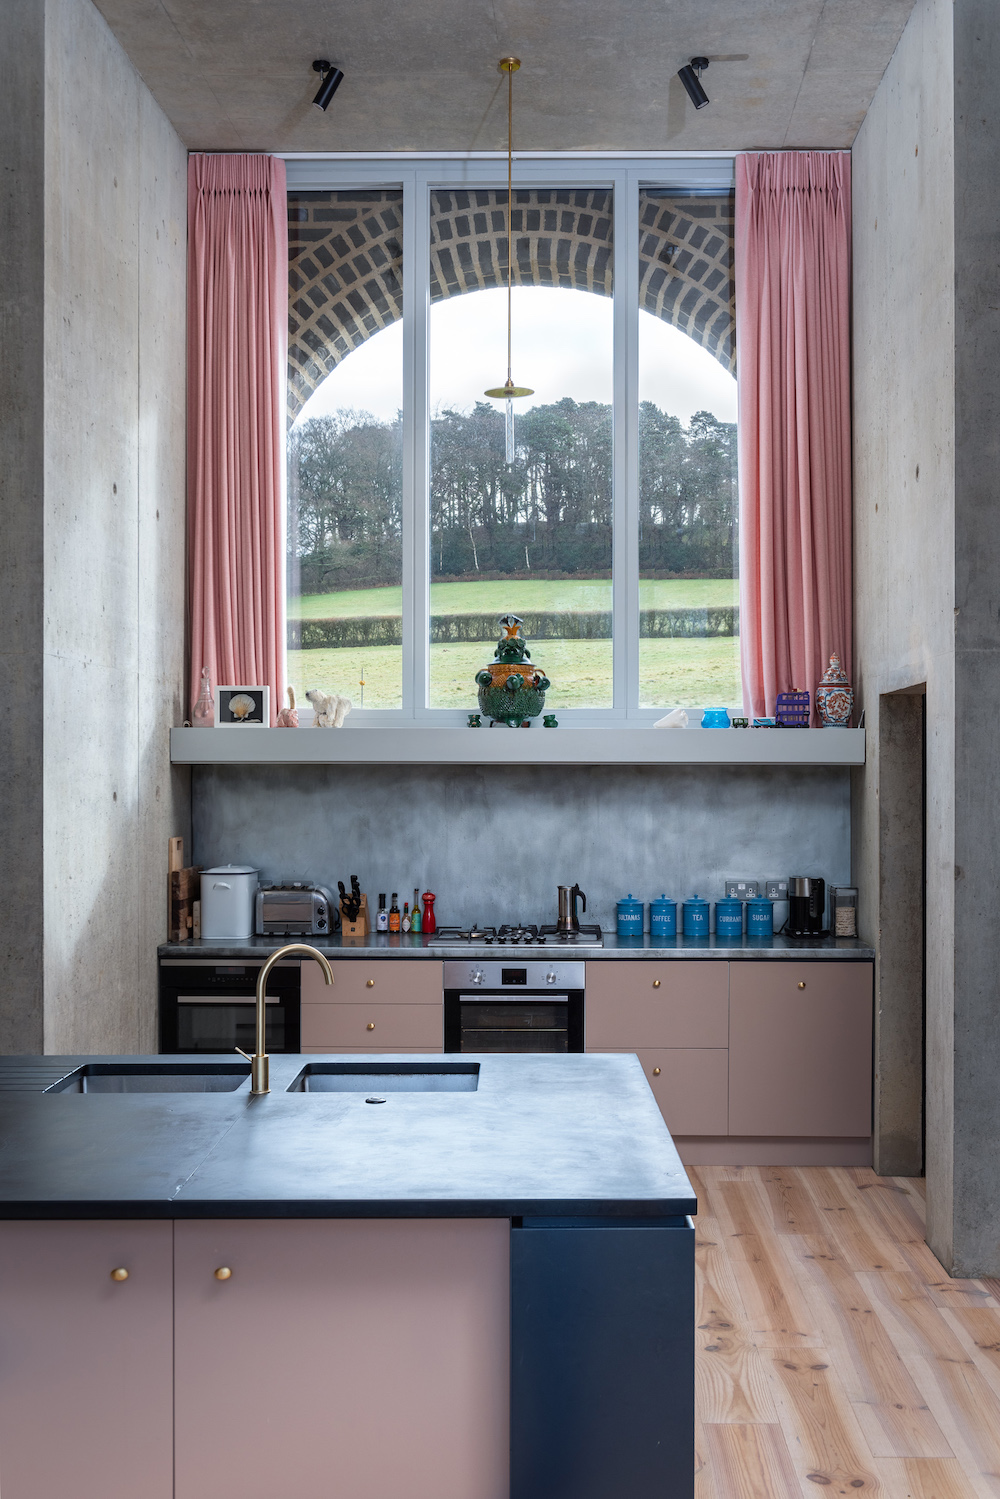 Concrete clad kitchen with pink cabinets and pink curtains